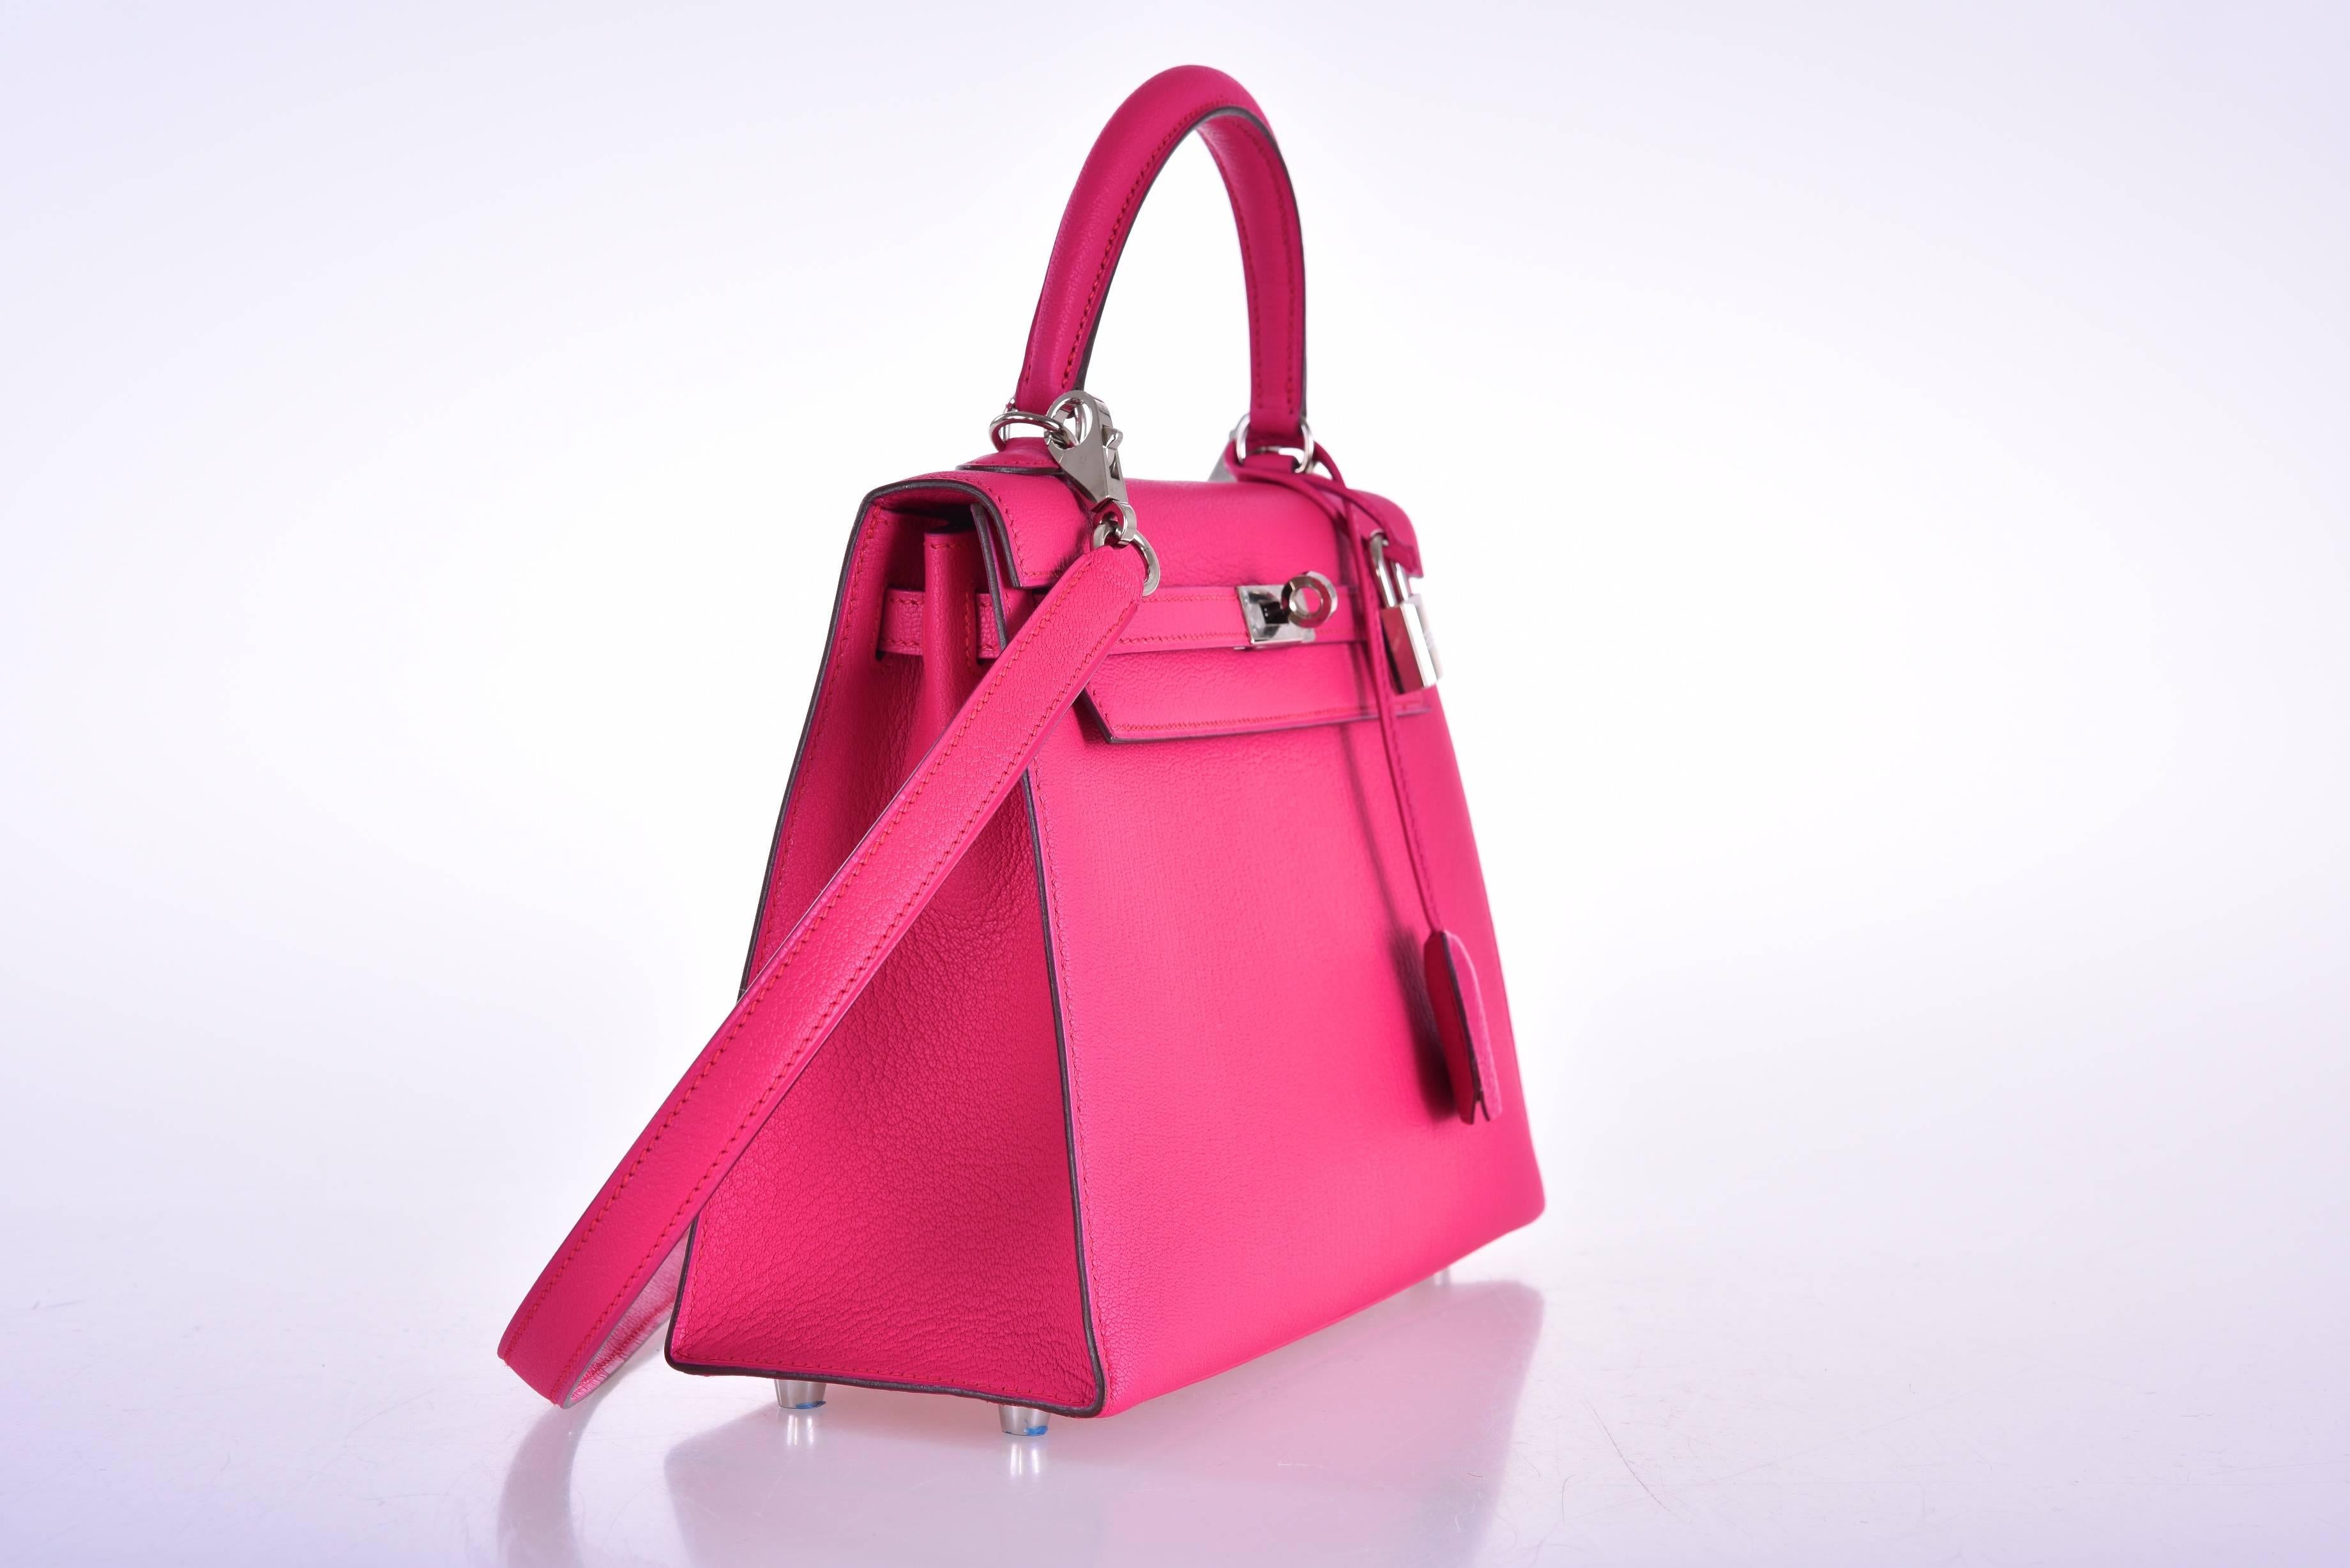 Hermes Kelly 25cm Bag in Fuschia Chevre Goat skin Leather Only on JaneFinds

Pristine 
Hardware: Palladium
Country of Origin: France
Color: Fuschia 
Closure: Toggle
Handle Drop (in inches): 3.5
Shoulder Strap Drop (in inches): 16.5
Height